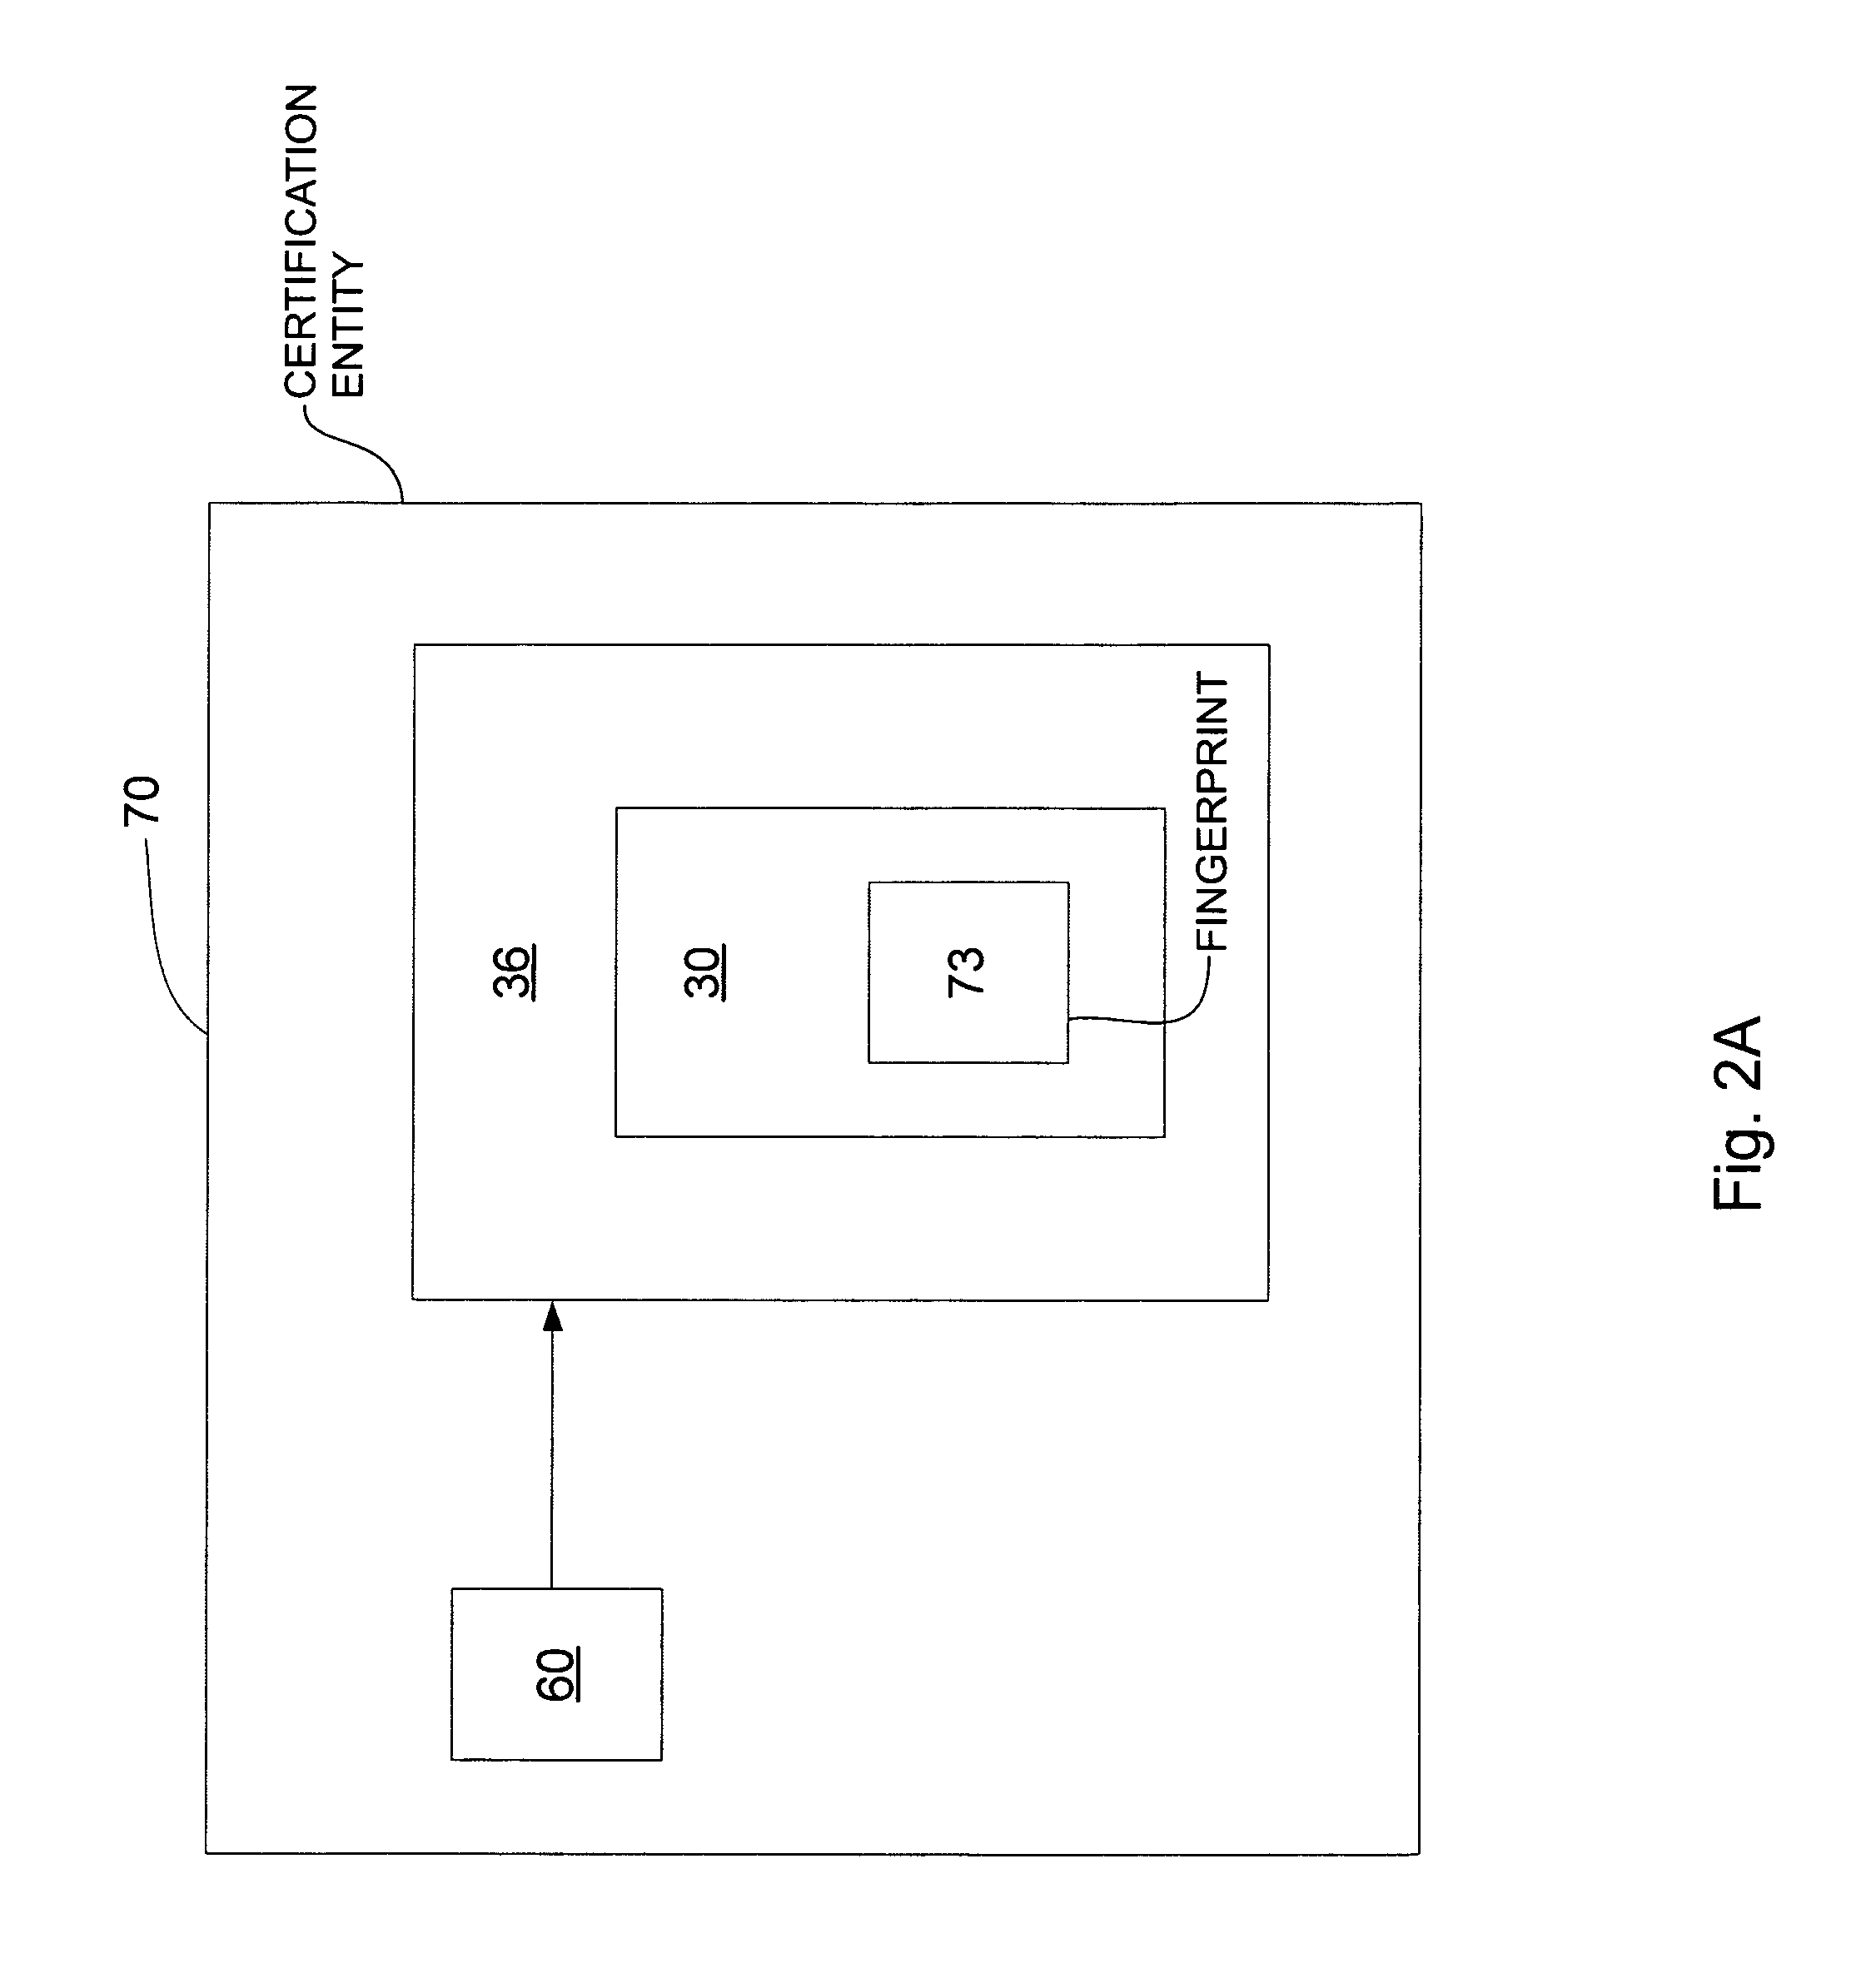 Computer-based method and apparatus for verifying an electronic voting process